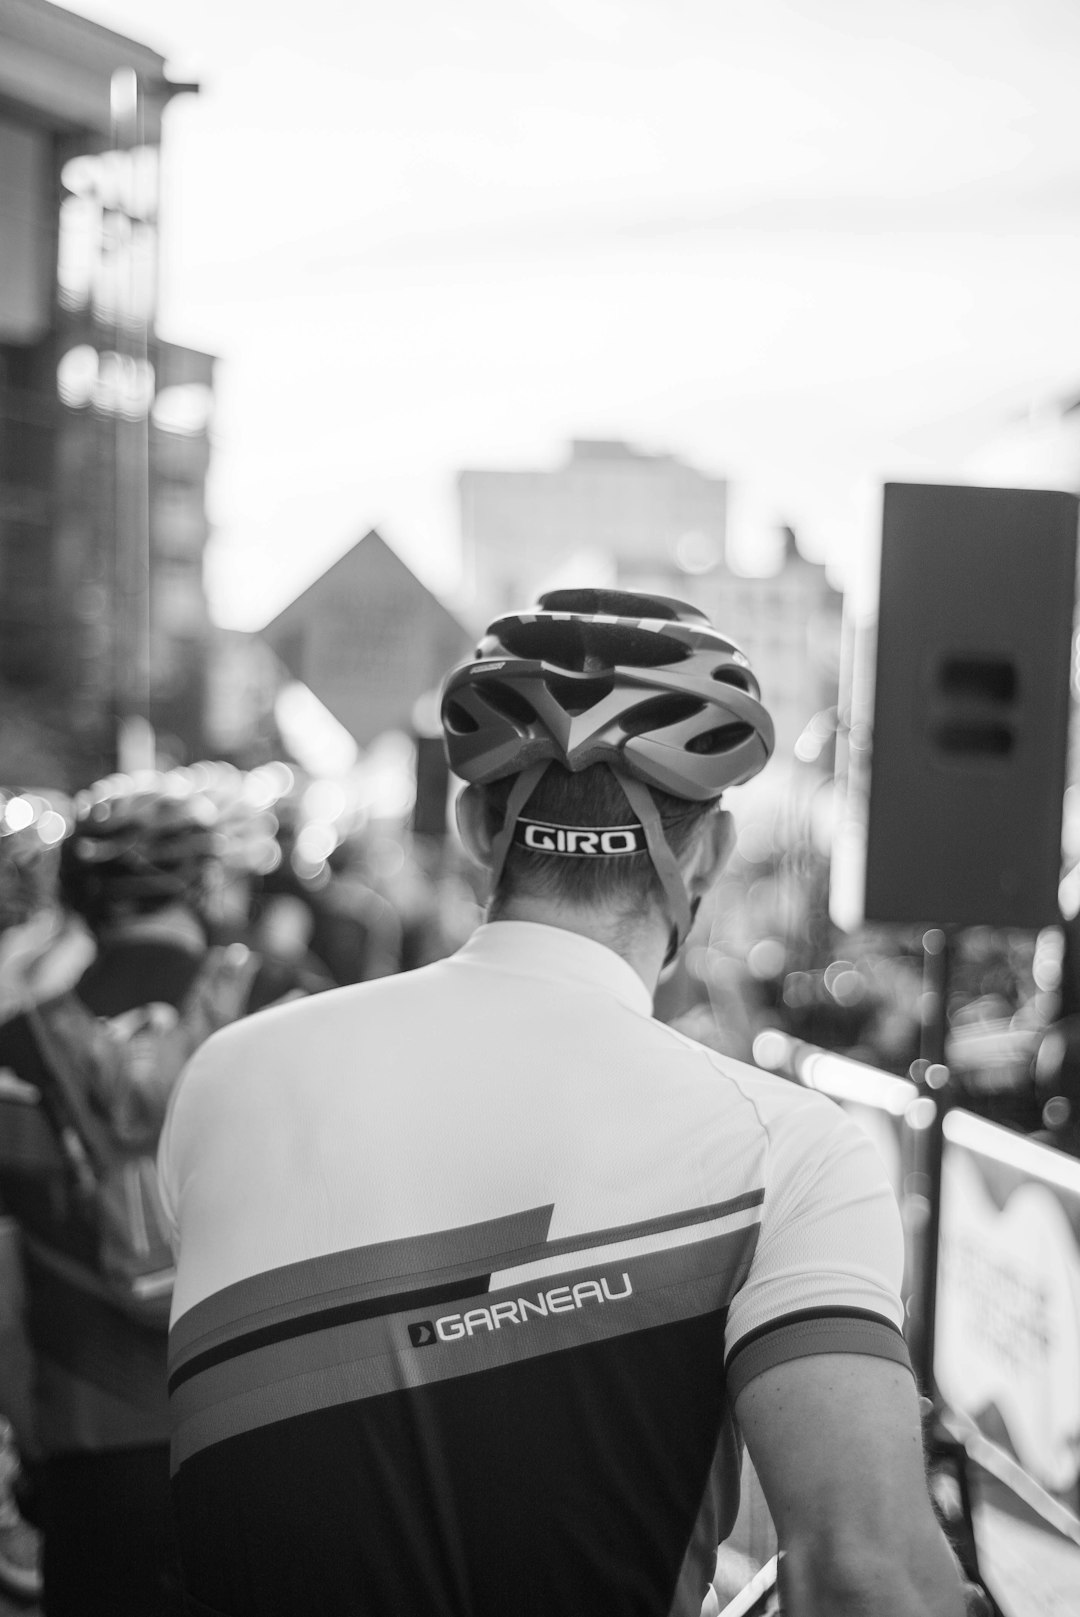 back view of cyclist at the event